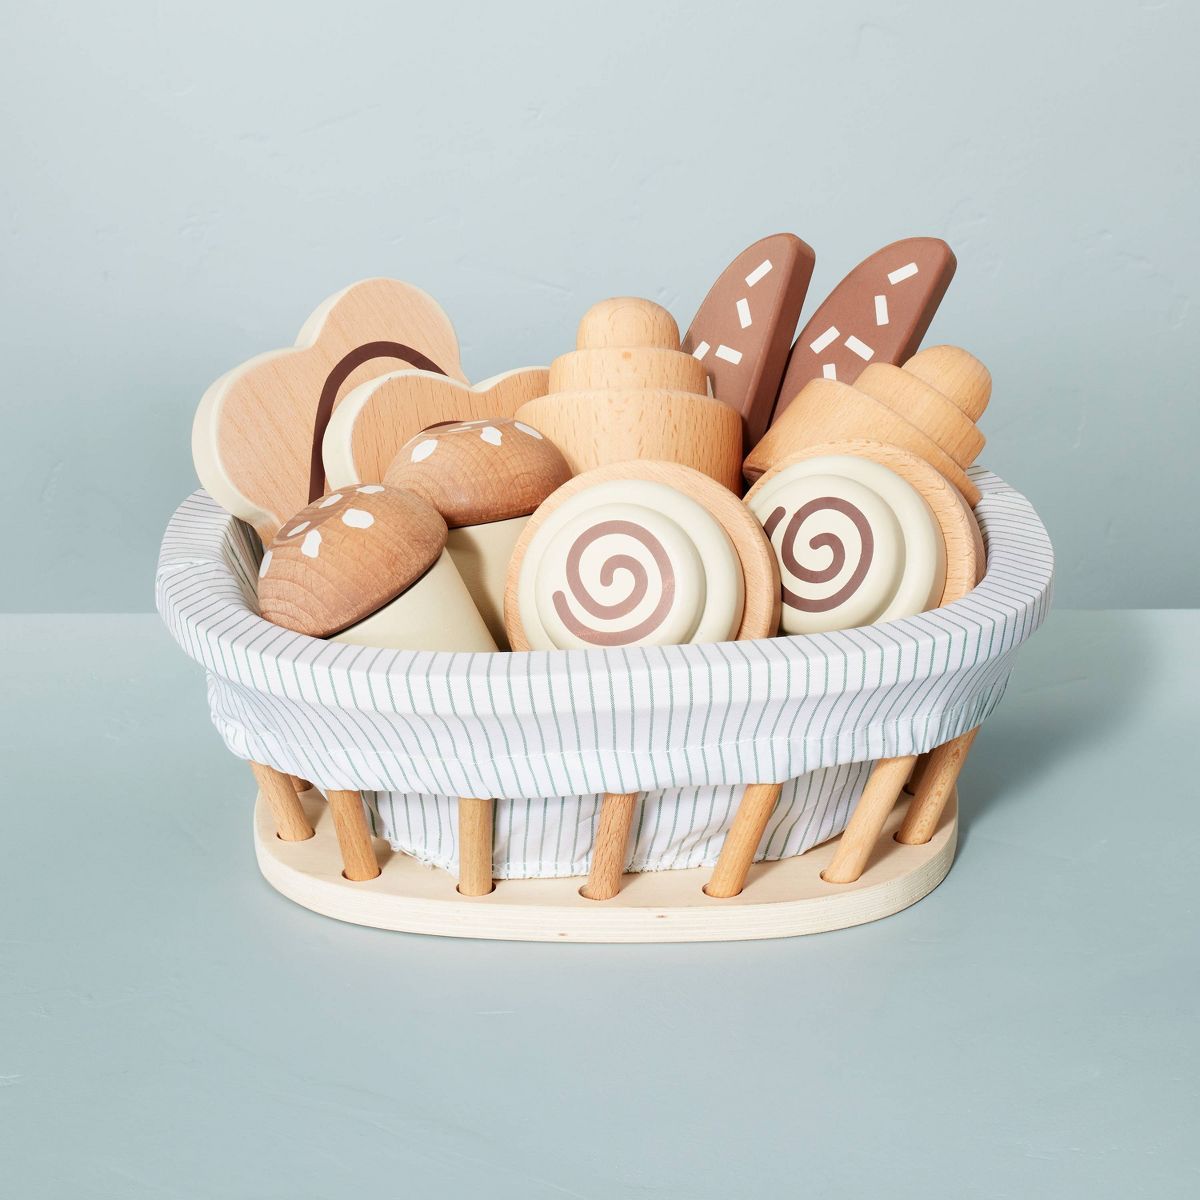 Toy Baked Goods Food Set - Hearth & Hand™ with Magnolia | Target